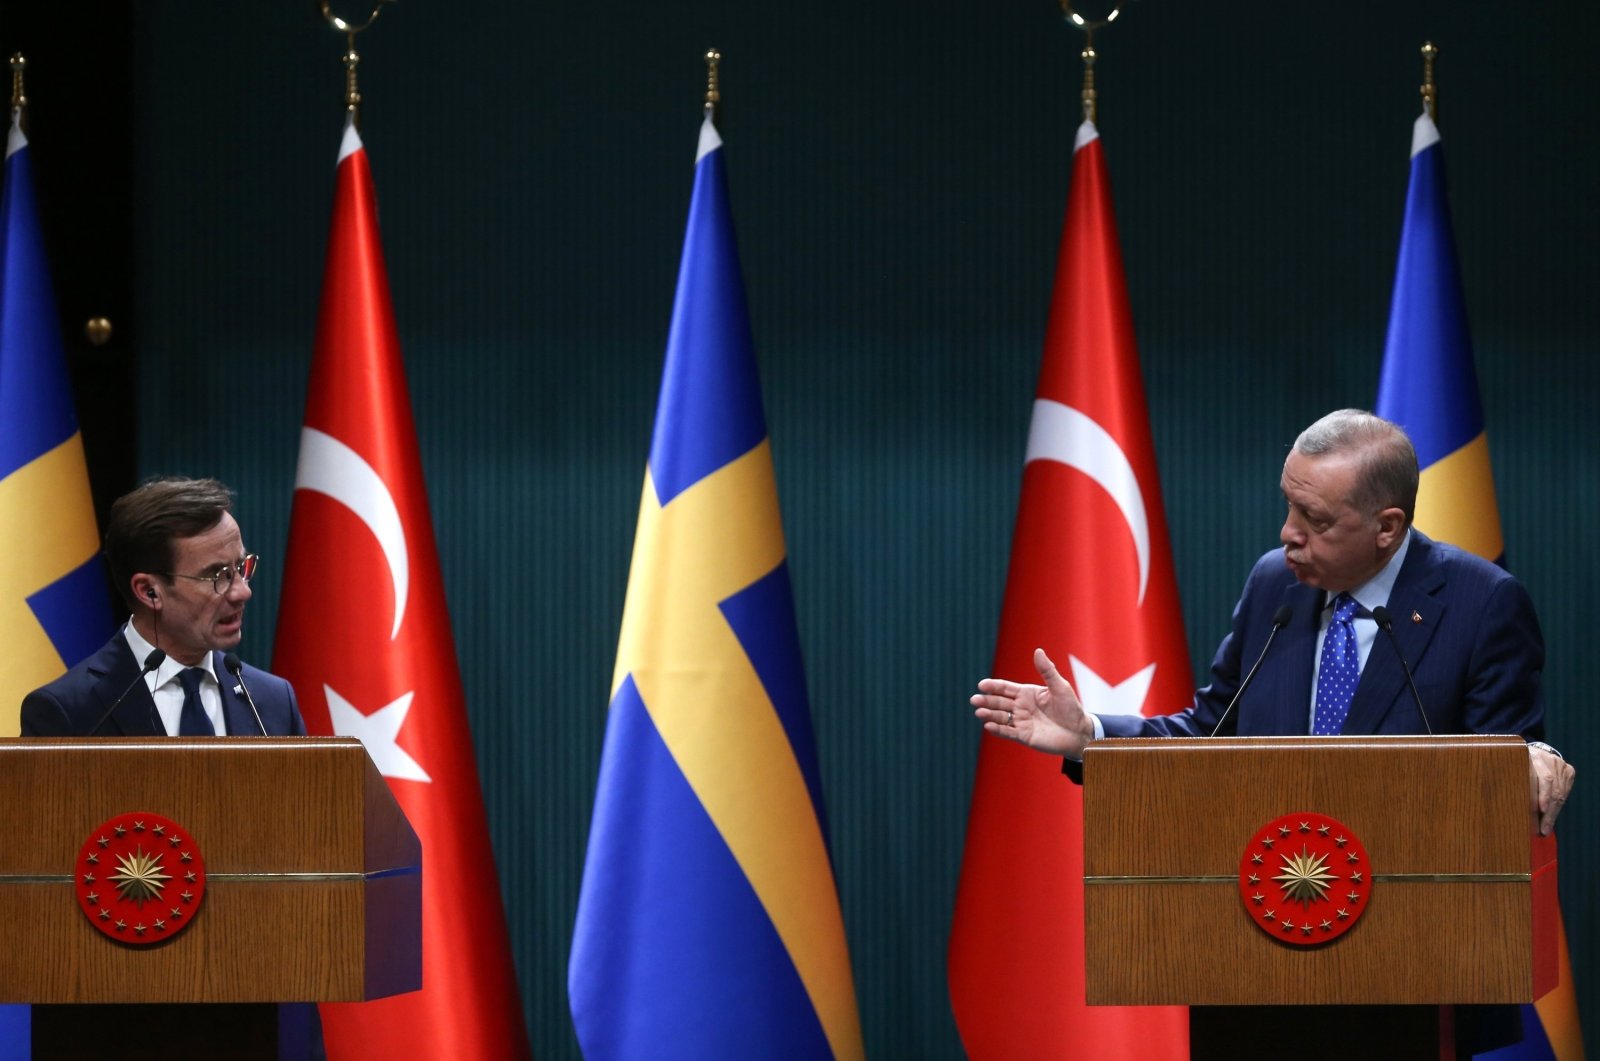 President Recep Tayyip Erdoğan (R) and Swedish Prime Minister Ulf Kristersson attend a press conference after their meeting at the Presidential Complex in the capital Ankara, Türkiye, Nov. 8, 2022. (EPA Photo)